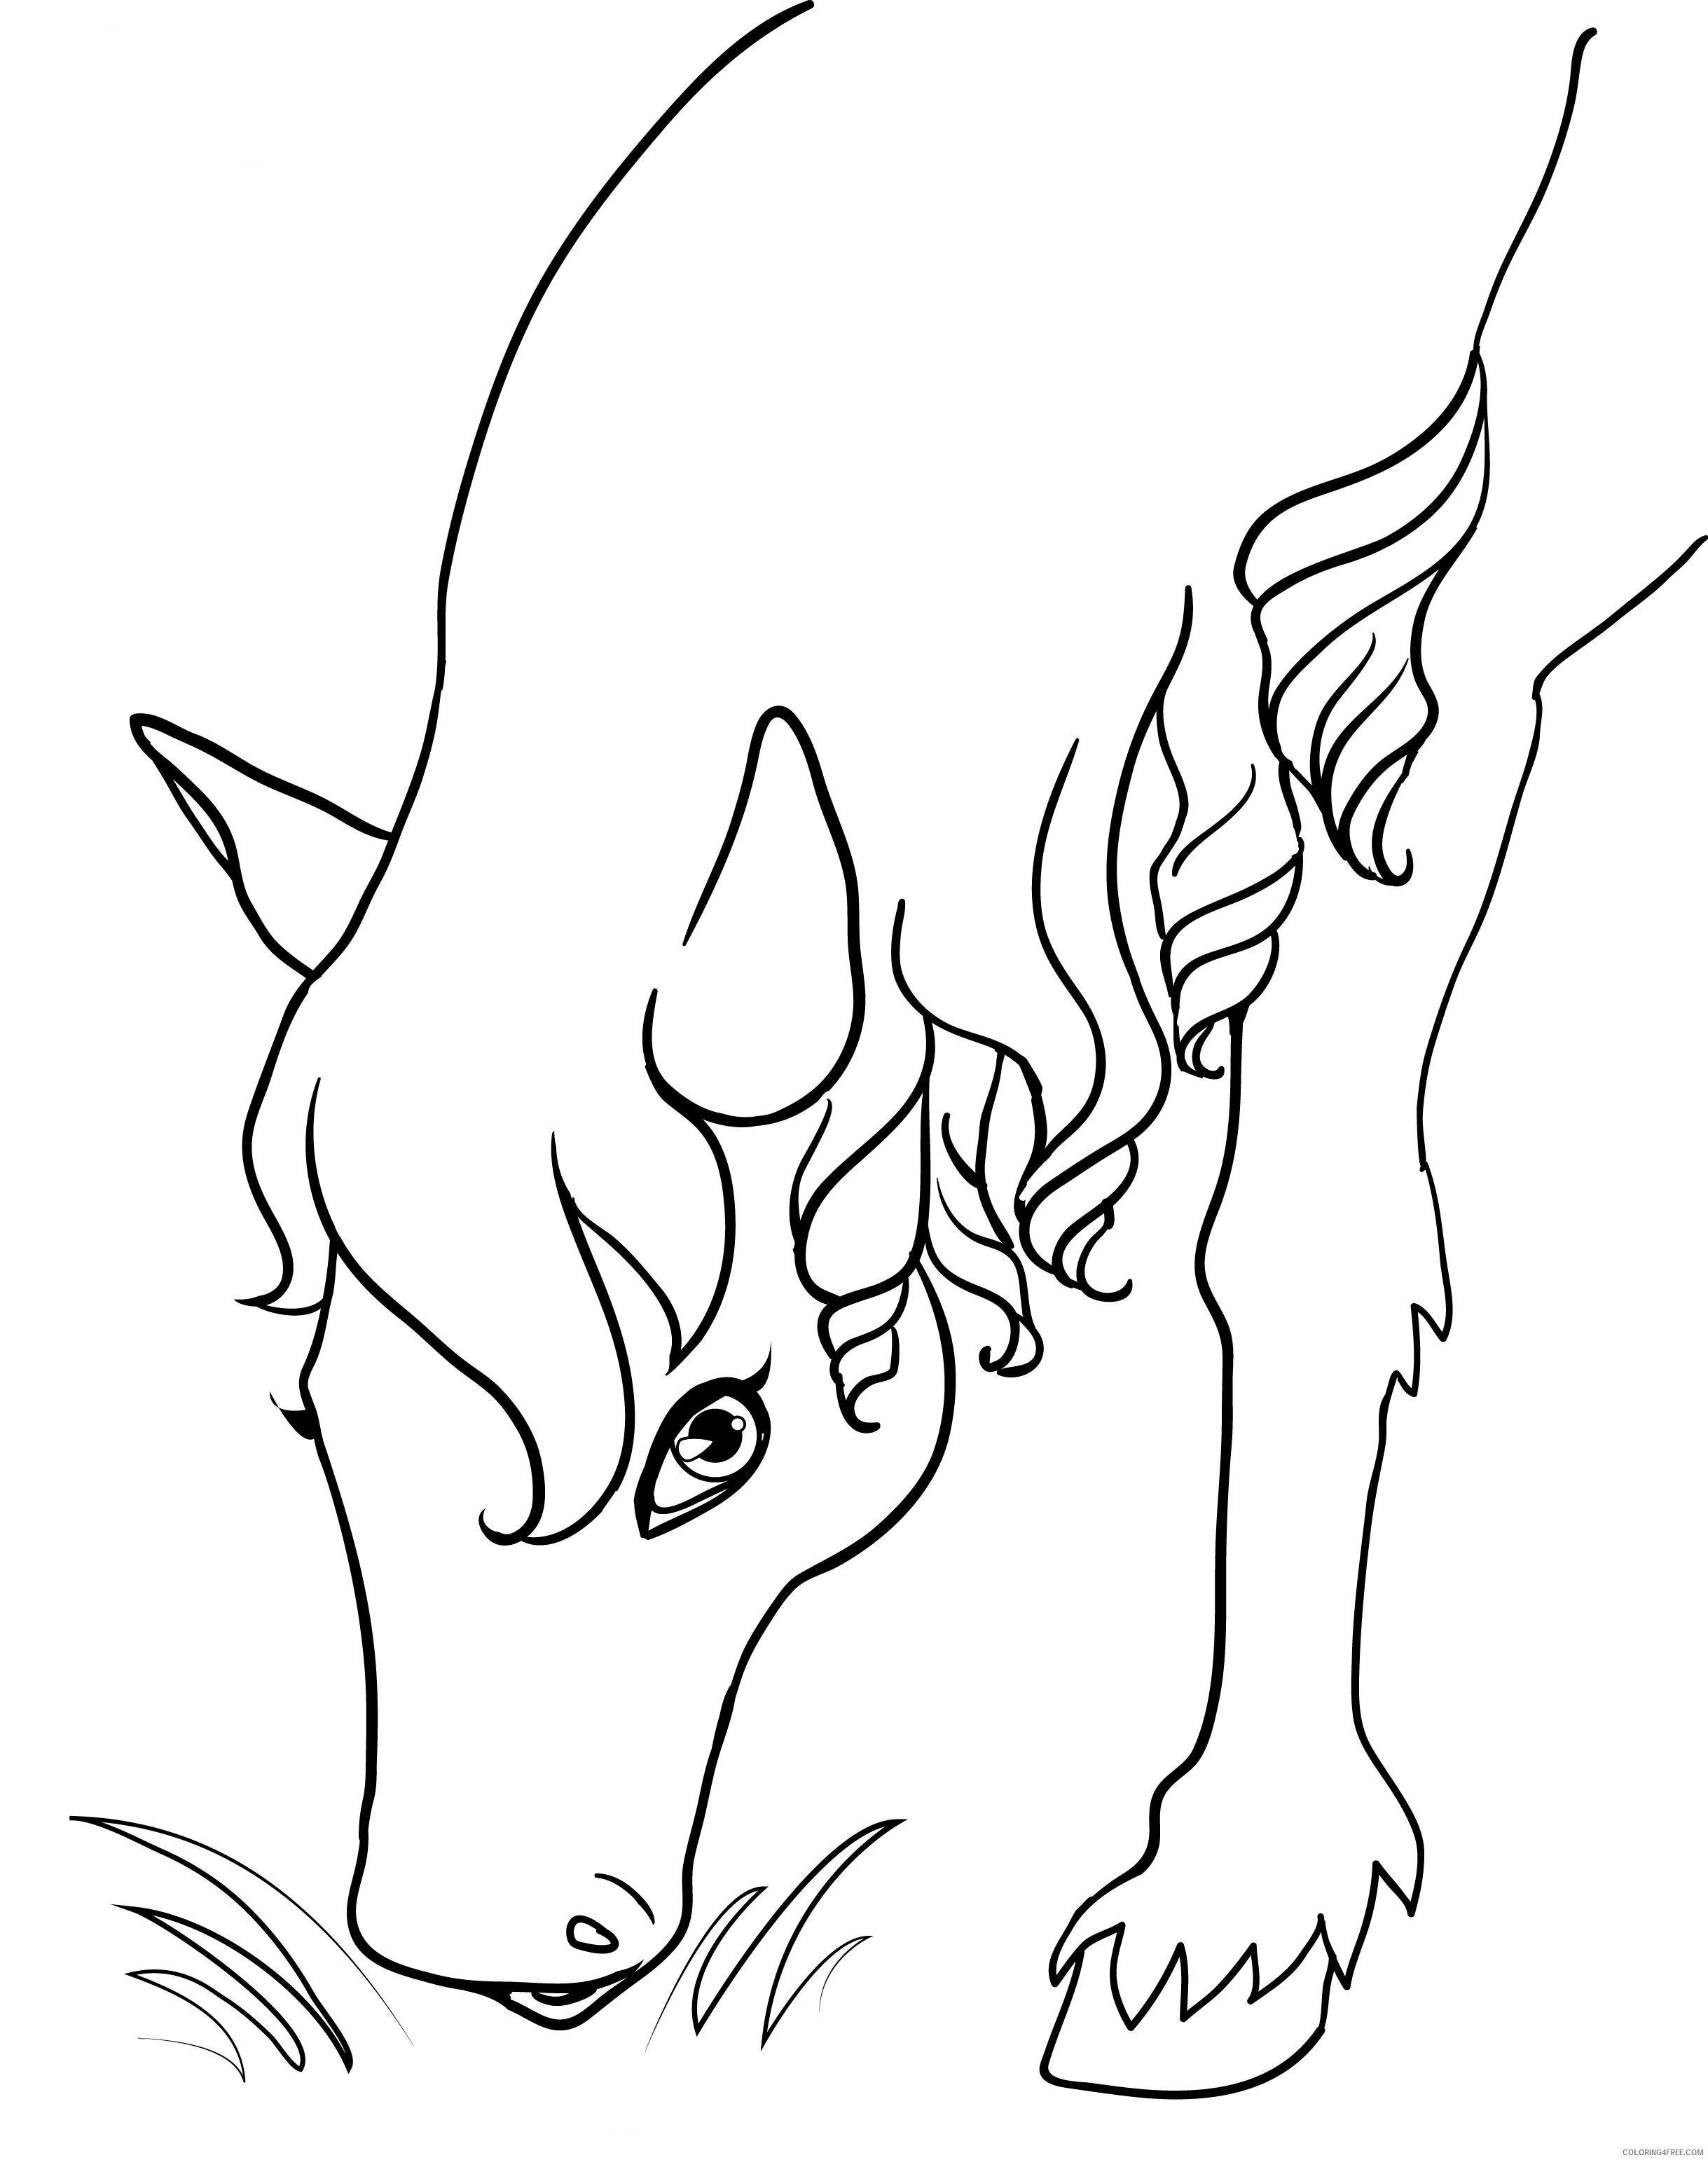 Animal Coloring Pages for Teens Printable Sheets Animal Penny Candy 2021 a 0346 Coloring4free